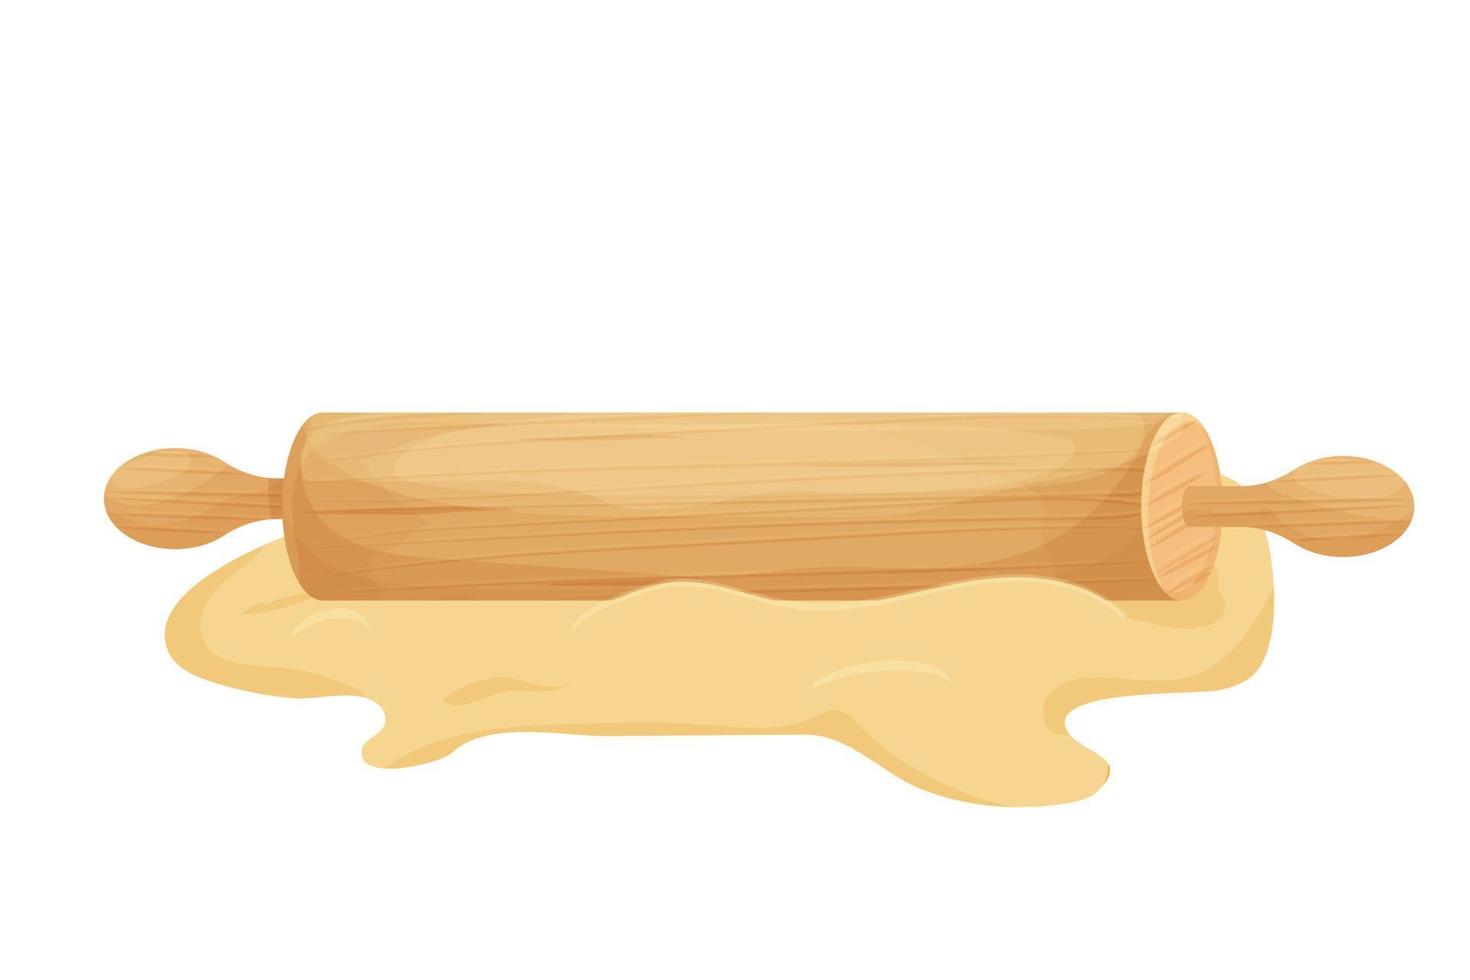 Wooden Rolling pin and dough isolated on white background in cartoon style stock vector illustration. Detailed and textured object. Vector illustration